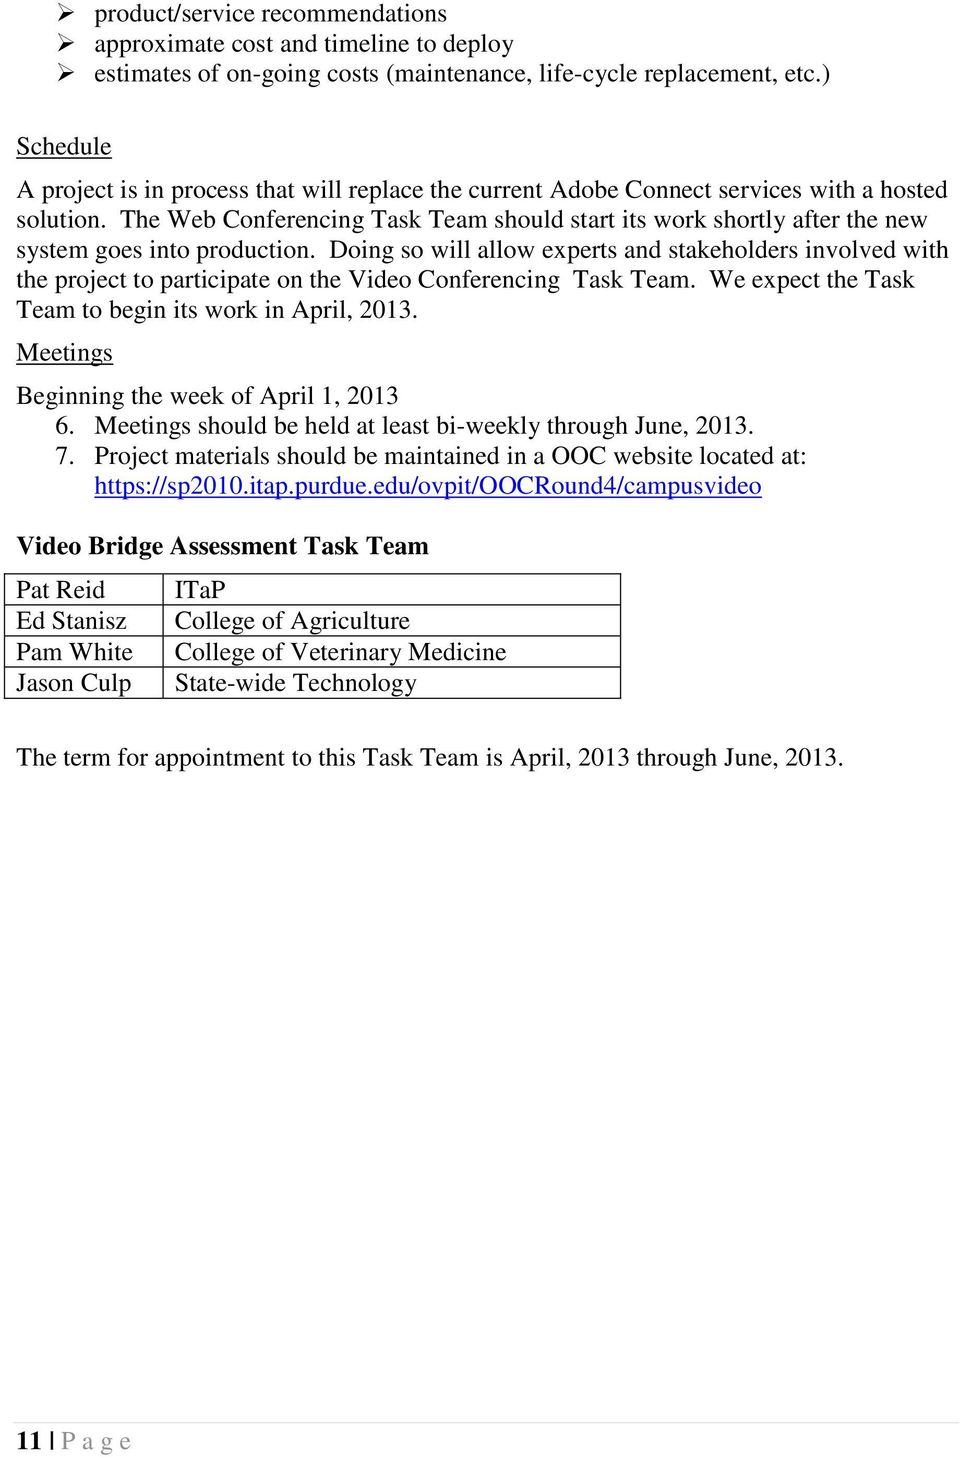 The Web Conferencing Task Team should start its work shortly after the new system goes into production.